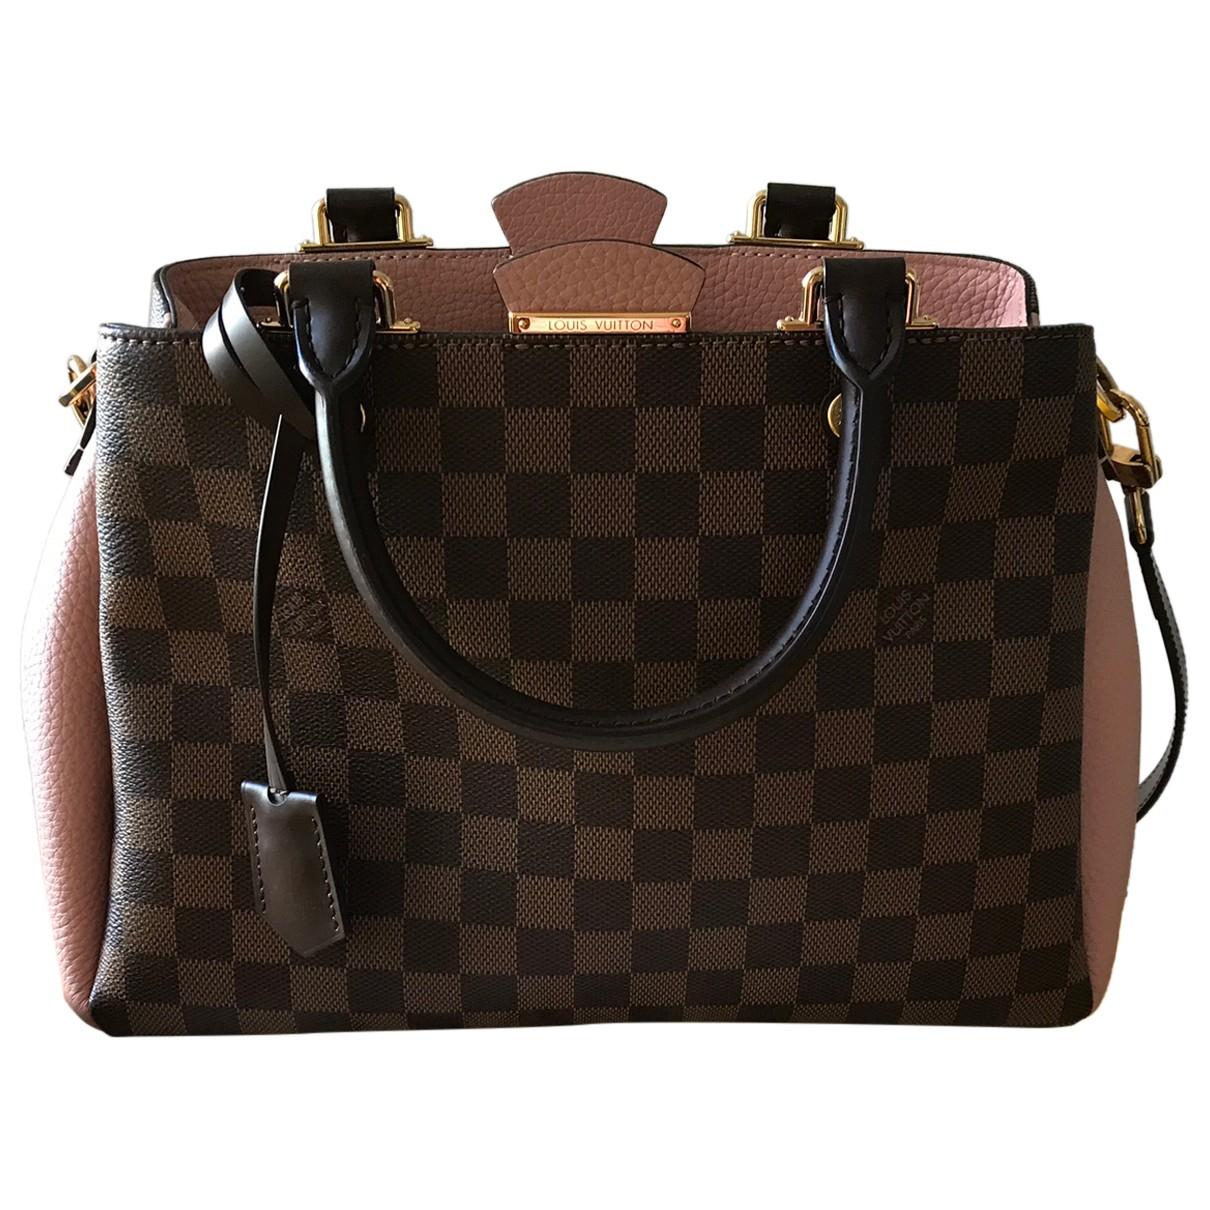 Louis Vuitton Brittany - 2 For Sale on 1stDibs  brittany louis vuitton, brittany  lv bag, louis vuitton brittany bag price